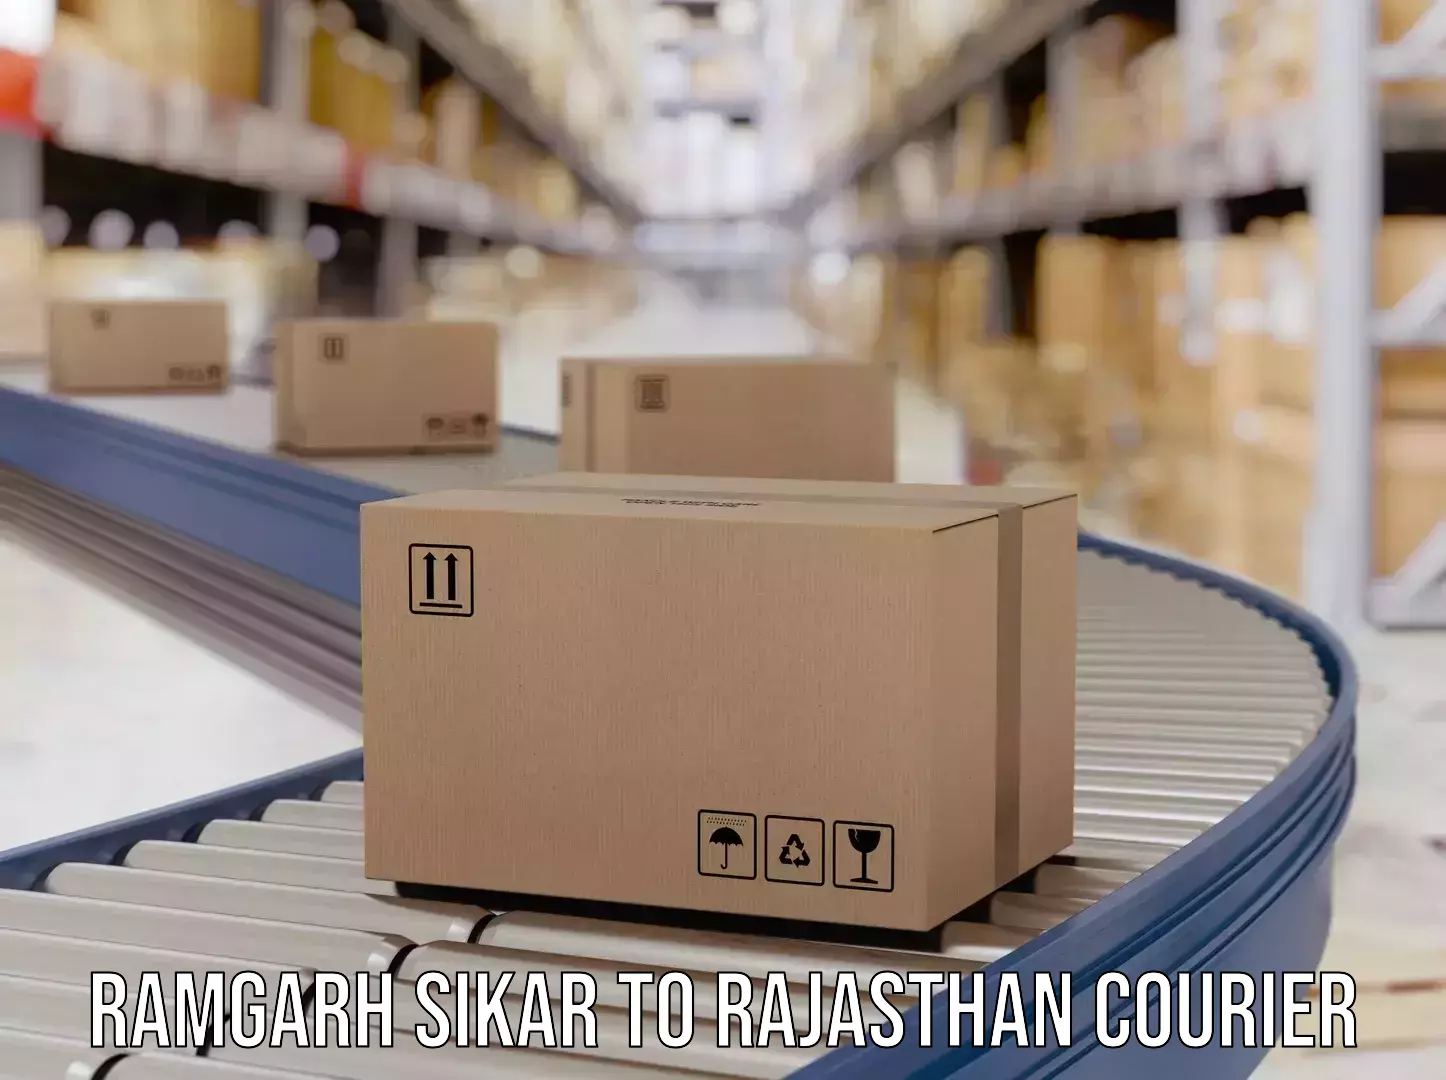 Punctual parcel services Ramgarh Sikar to Marwar